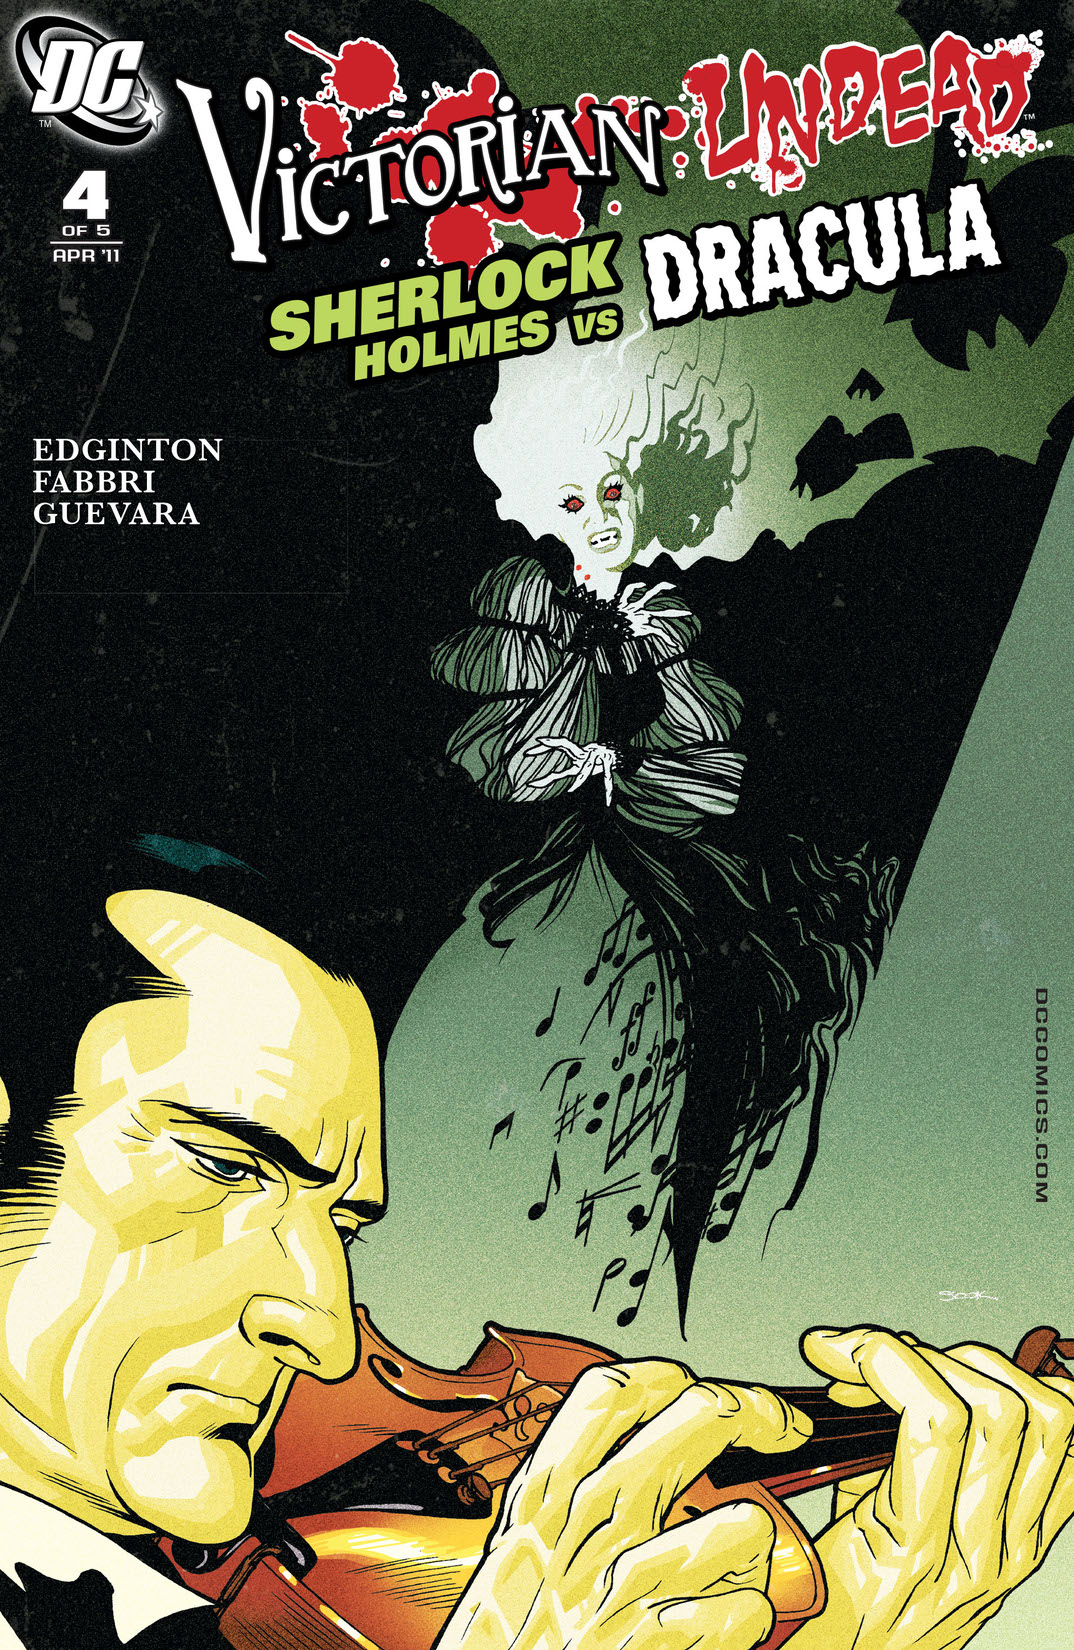 Victorian Undead II: Sherlock Holmes vs. Dracula #4 preview images